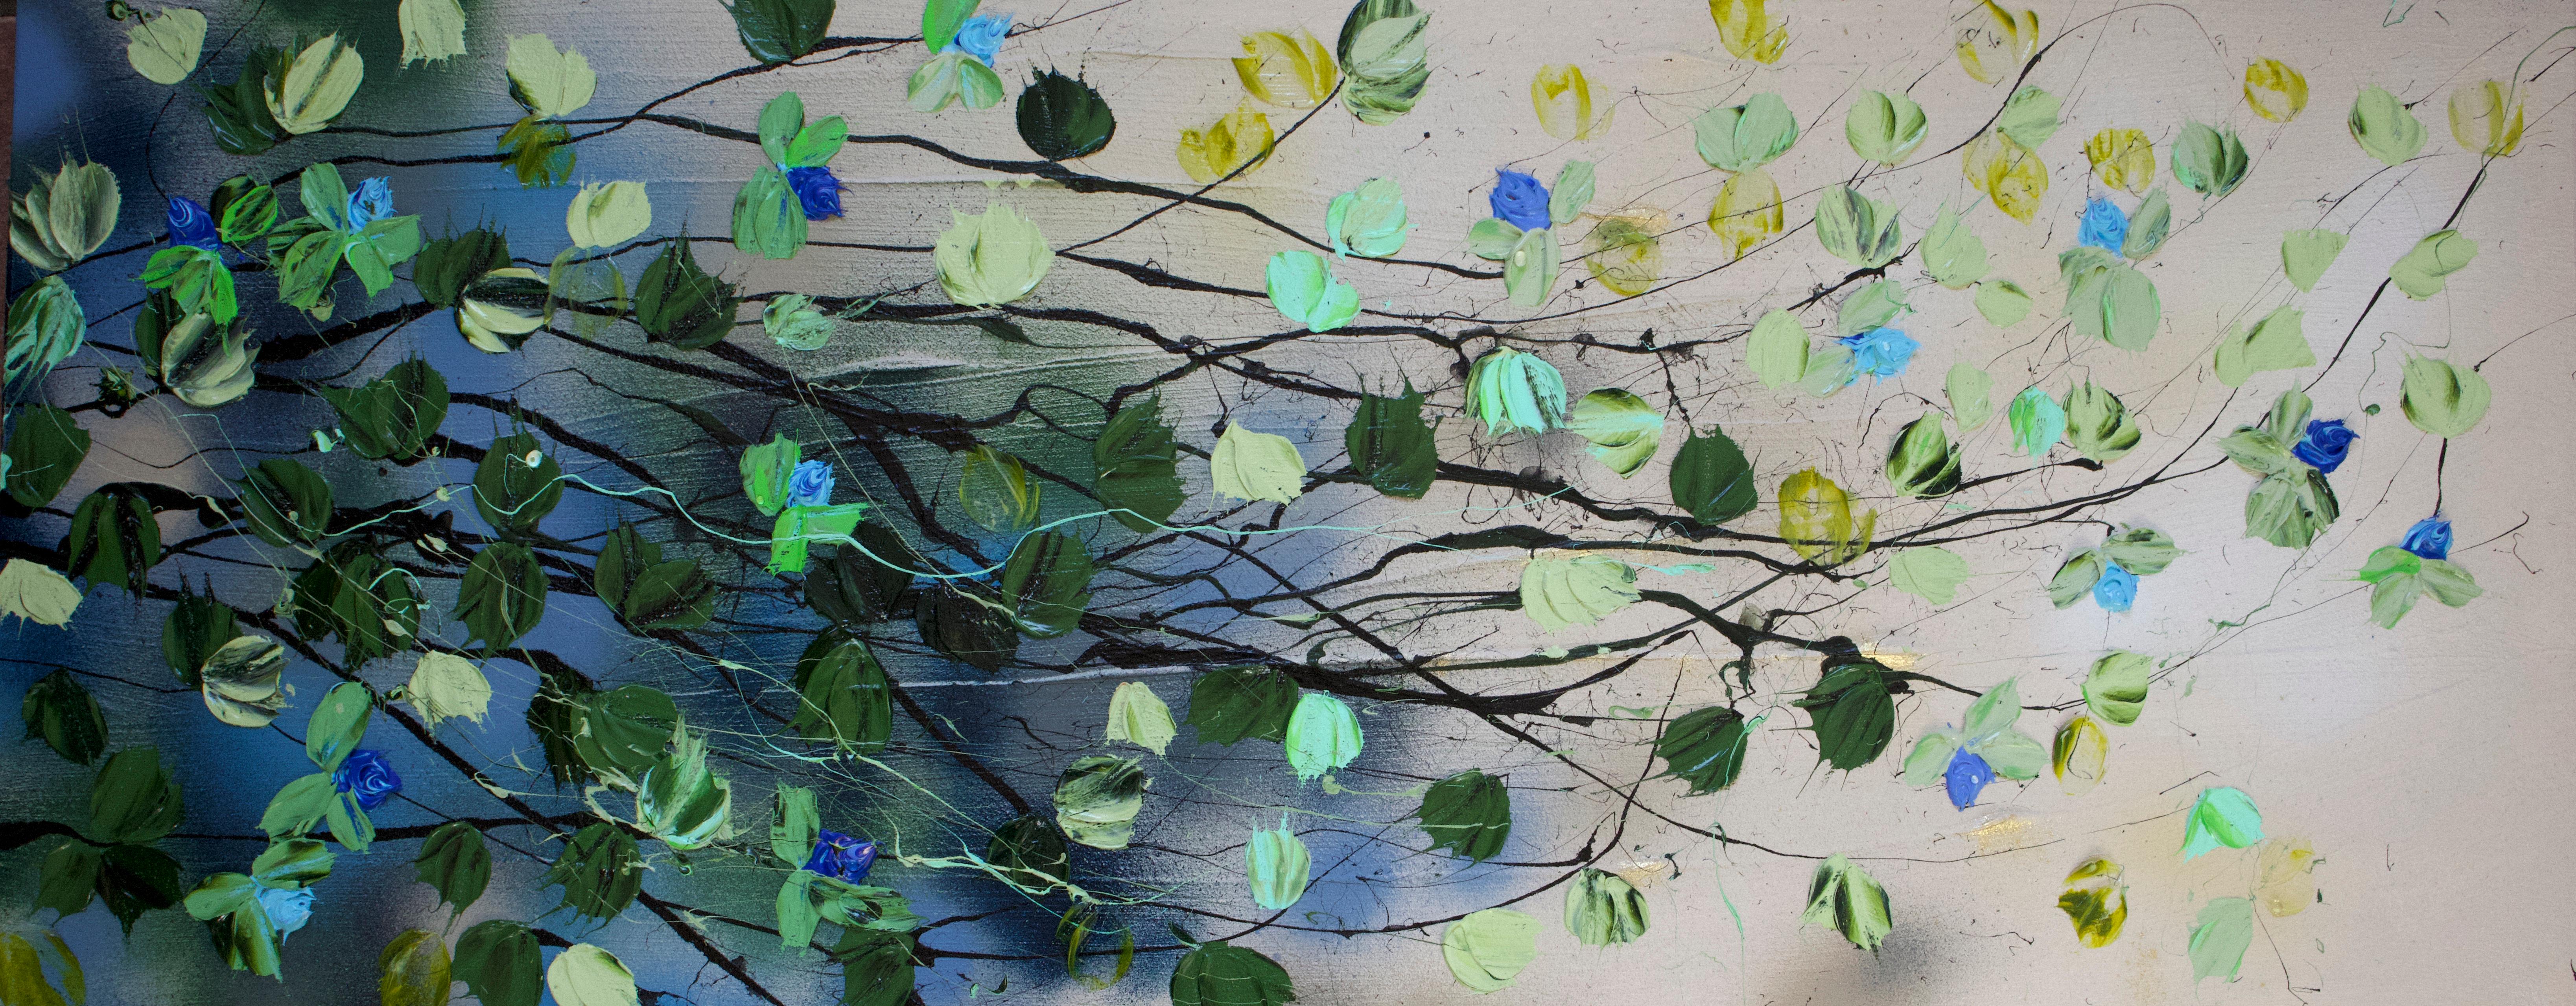 Anastassia Skopp Interior Painting - "BLUE BLOOMS" floral long textured painting, vertical and horizontal format